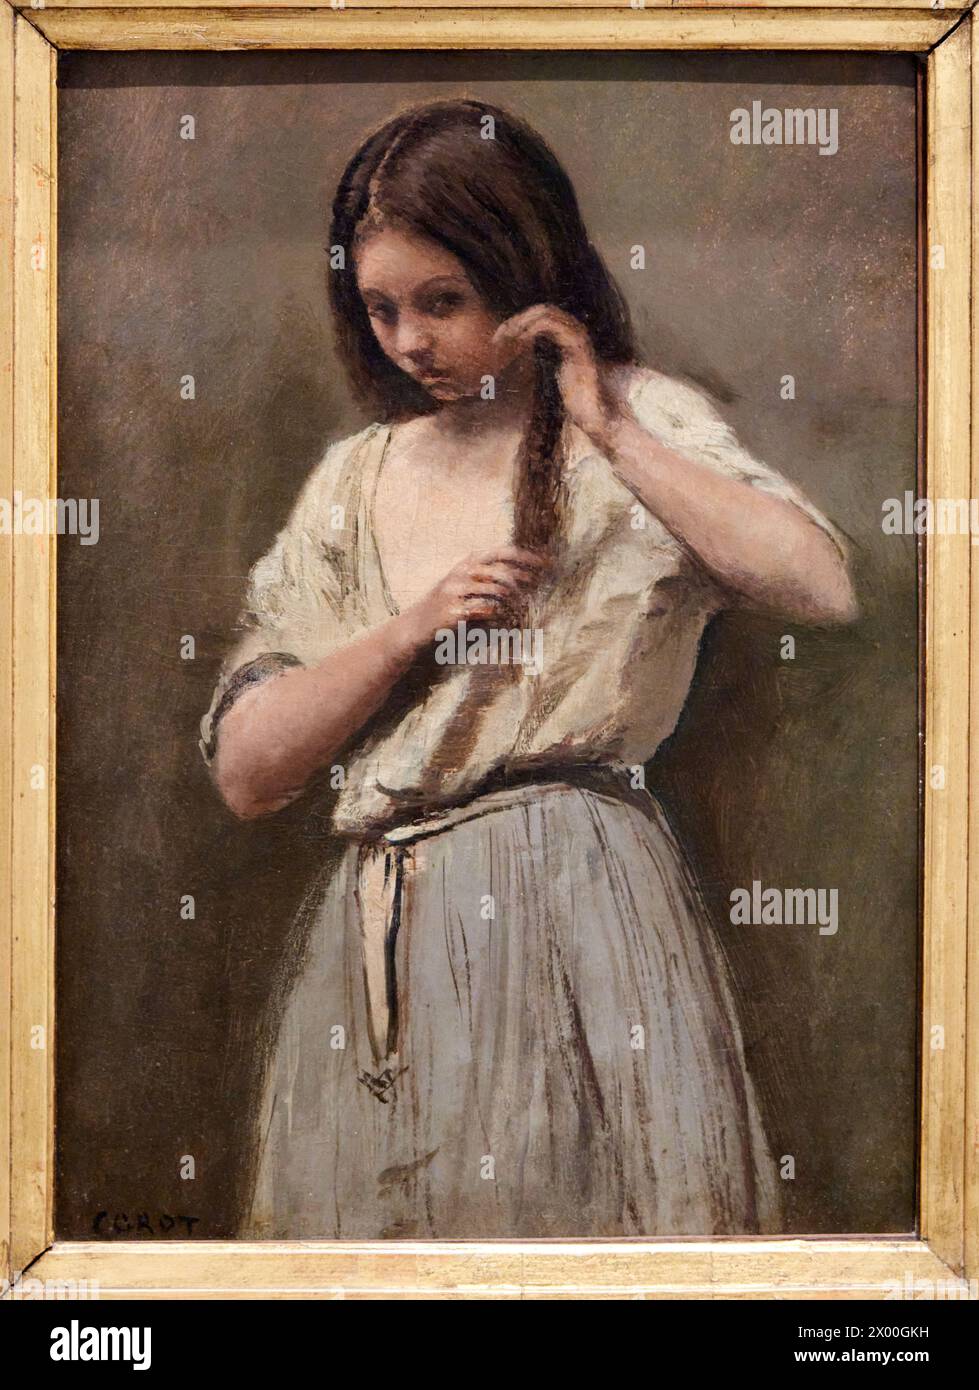 Jean-Baptiste Camille Corot, 1796-1875, Jeune fille à sa toilette, Young Girl at Her toilet, 1850-1875. , Museo Reina Sofia, Madrid, Spagna. Foto Stock